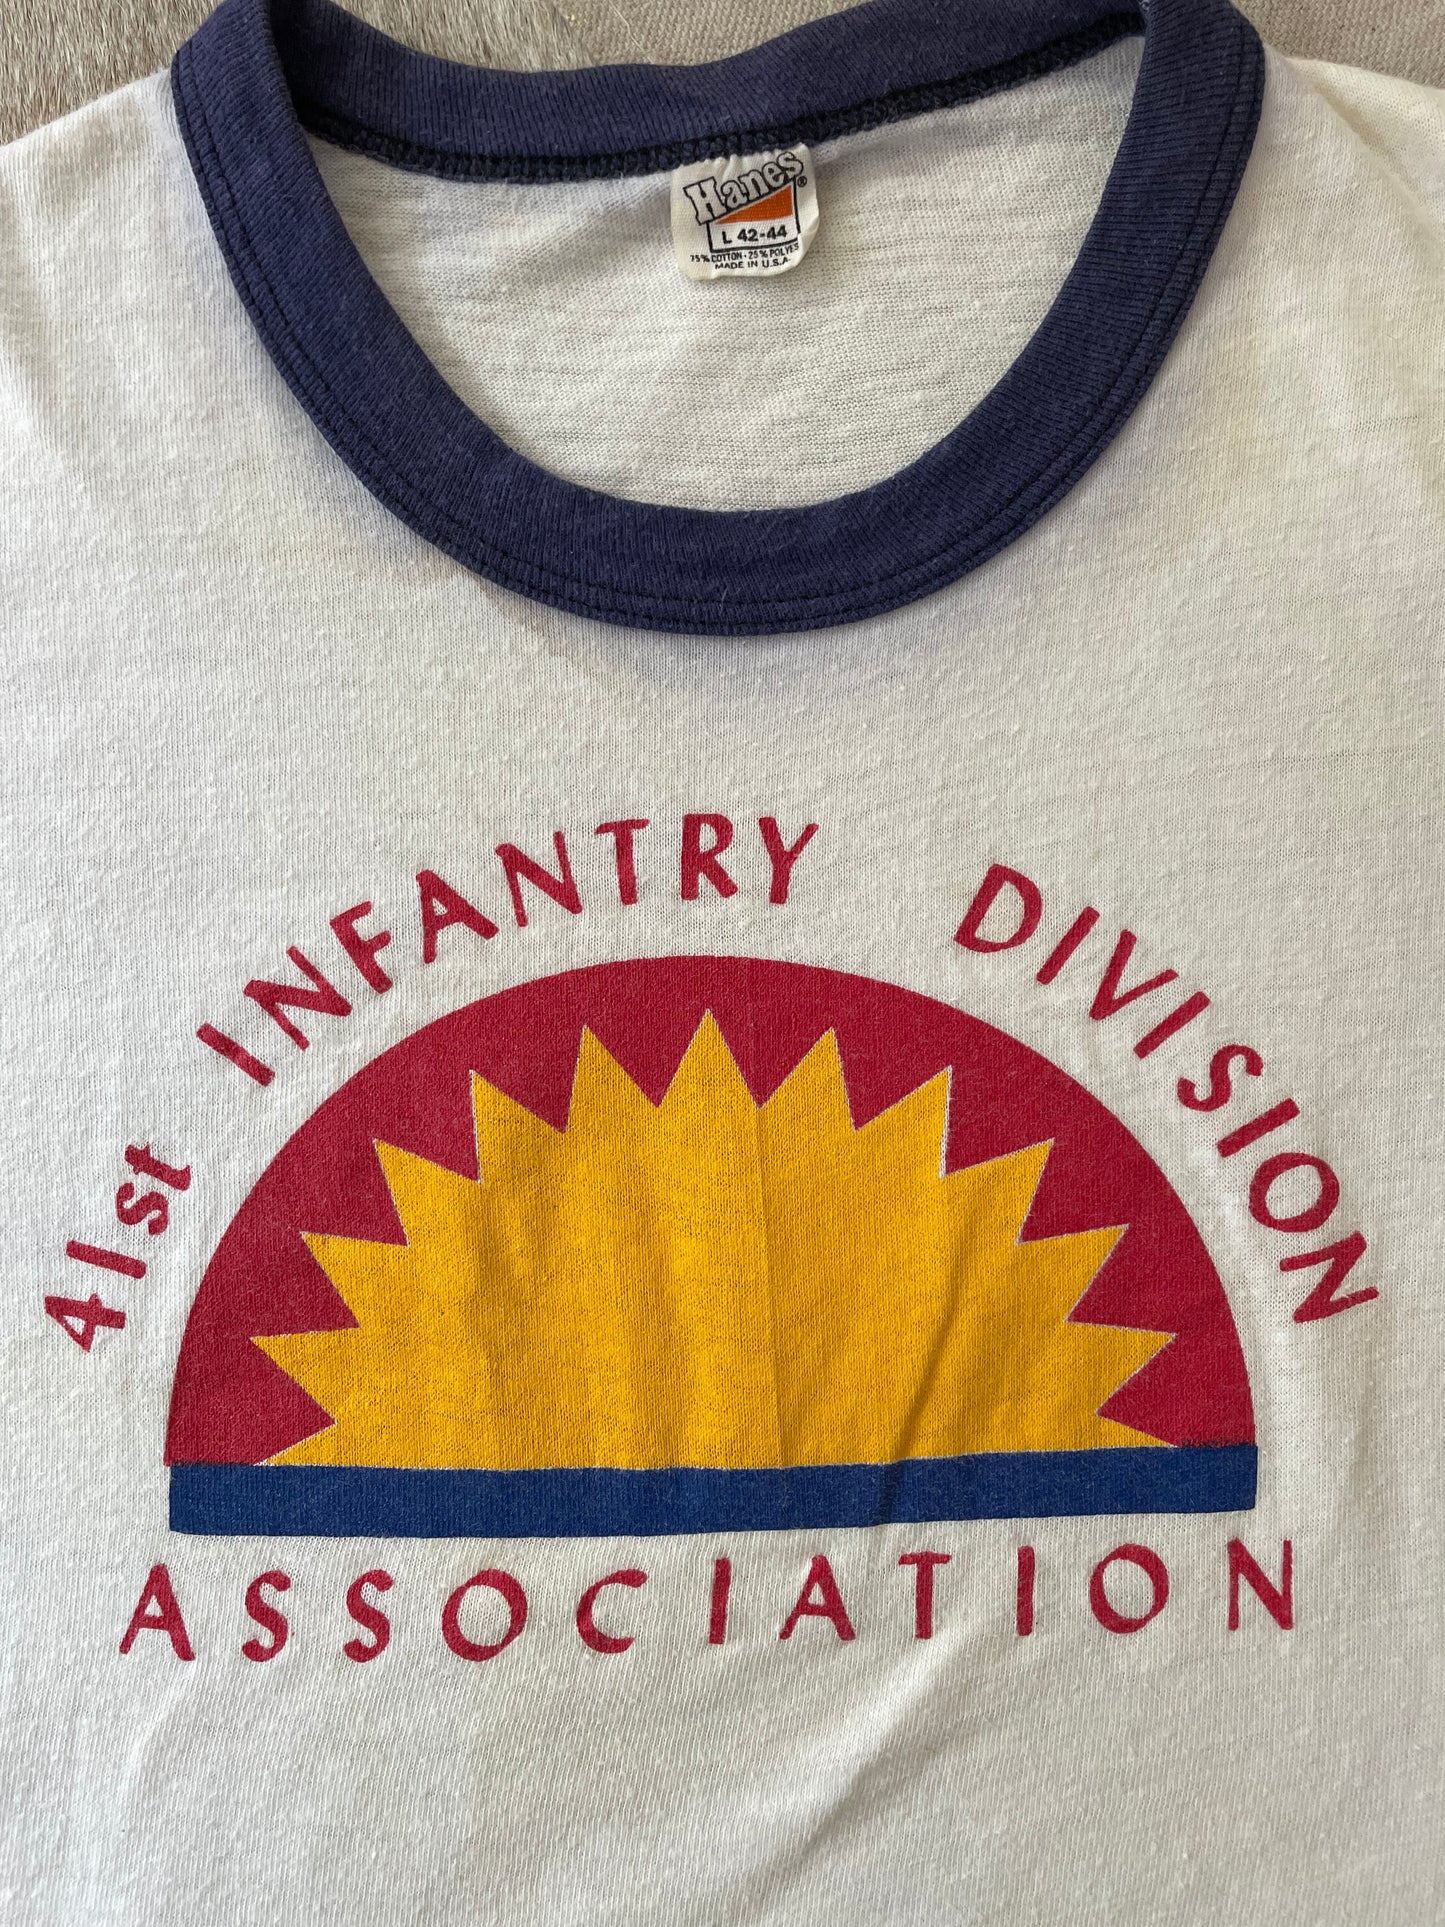 70s 41st Infantry Division Association Tee